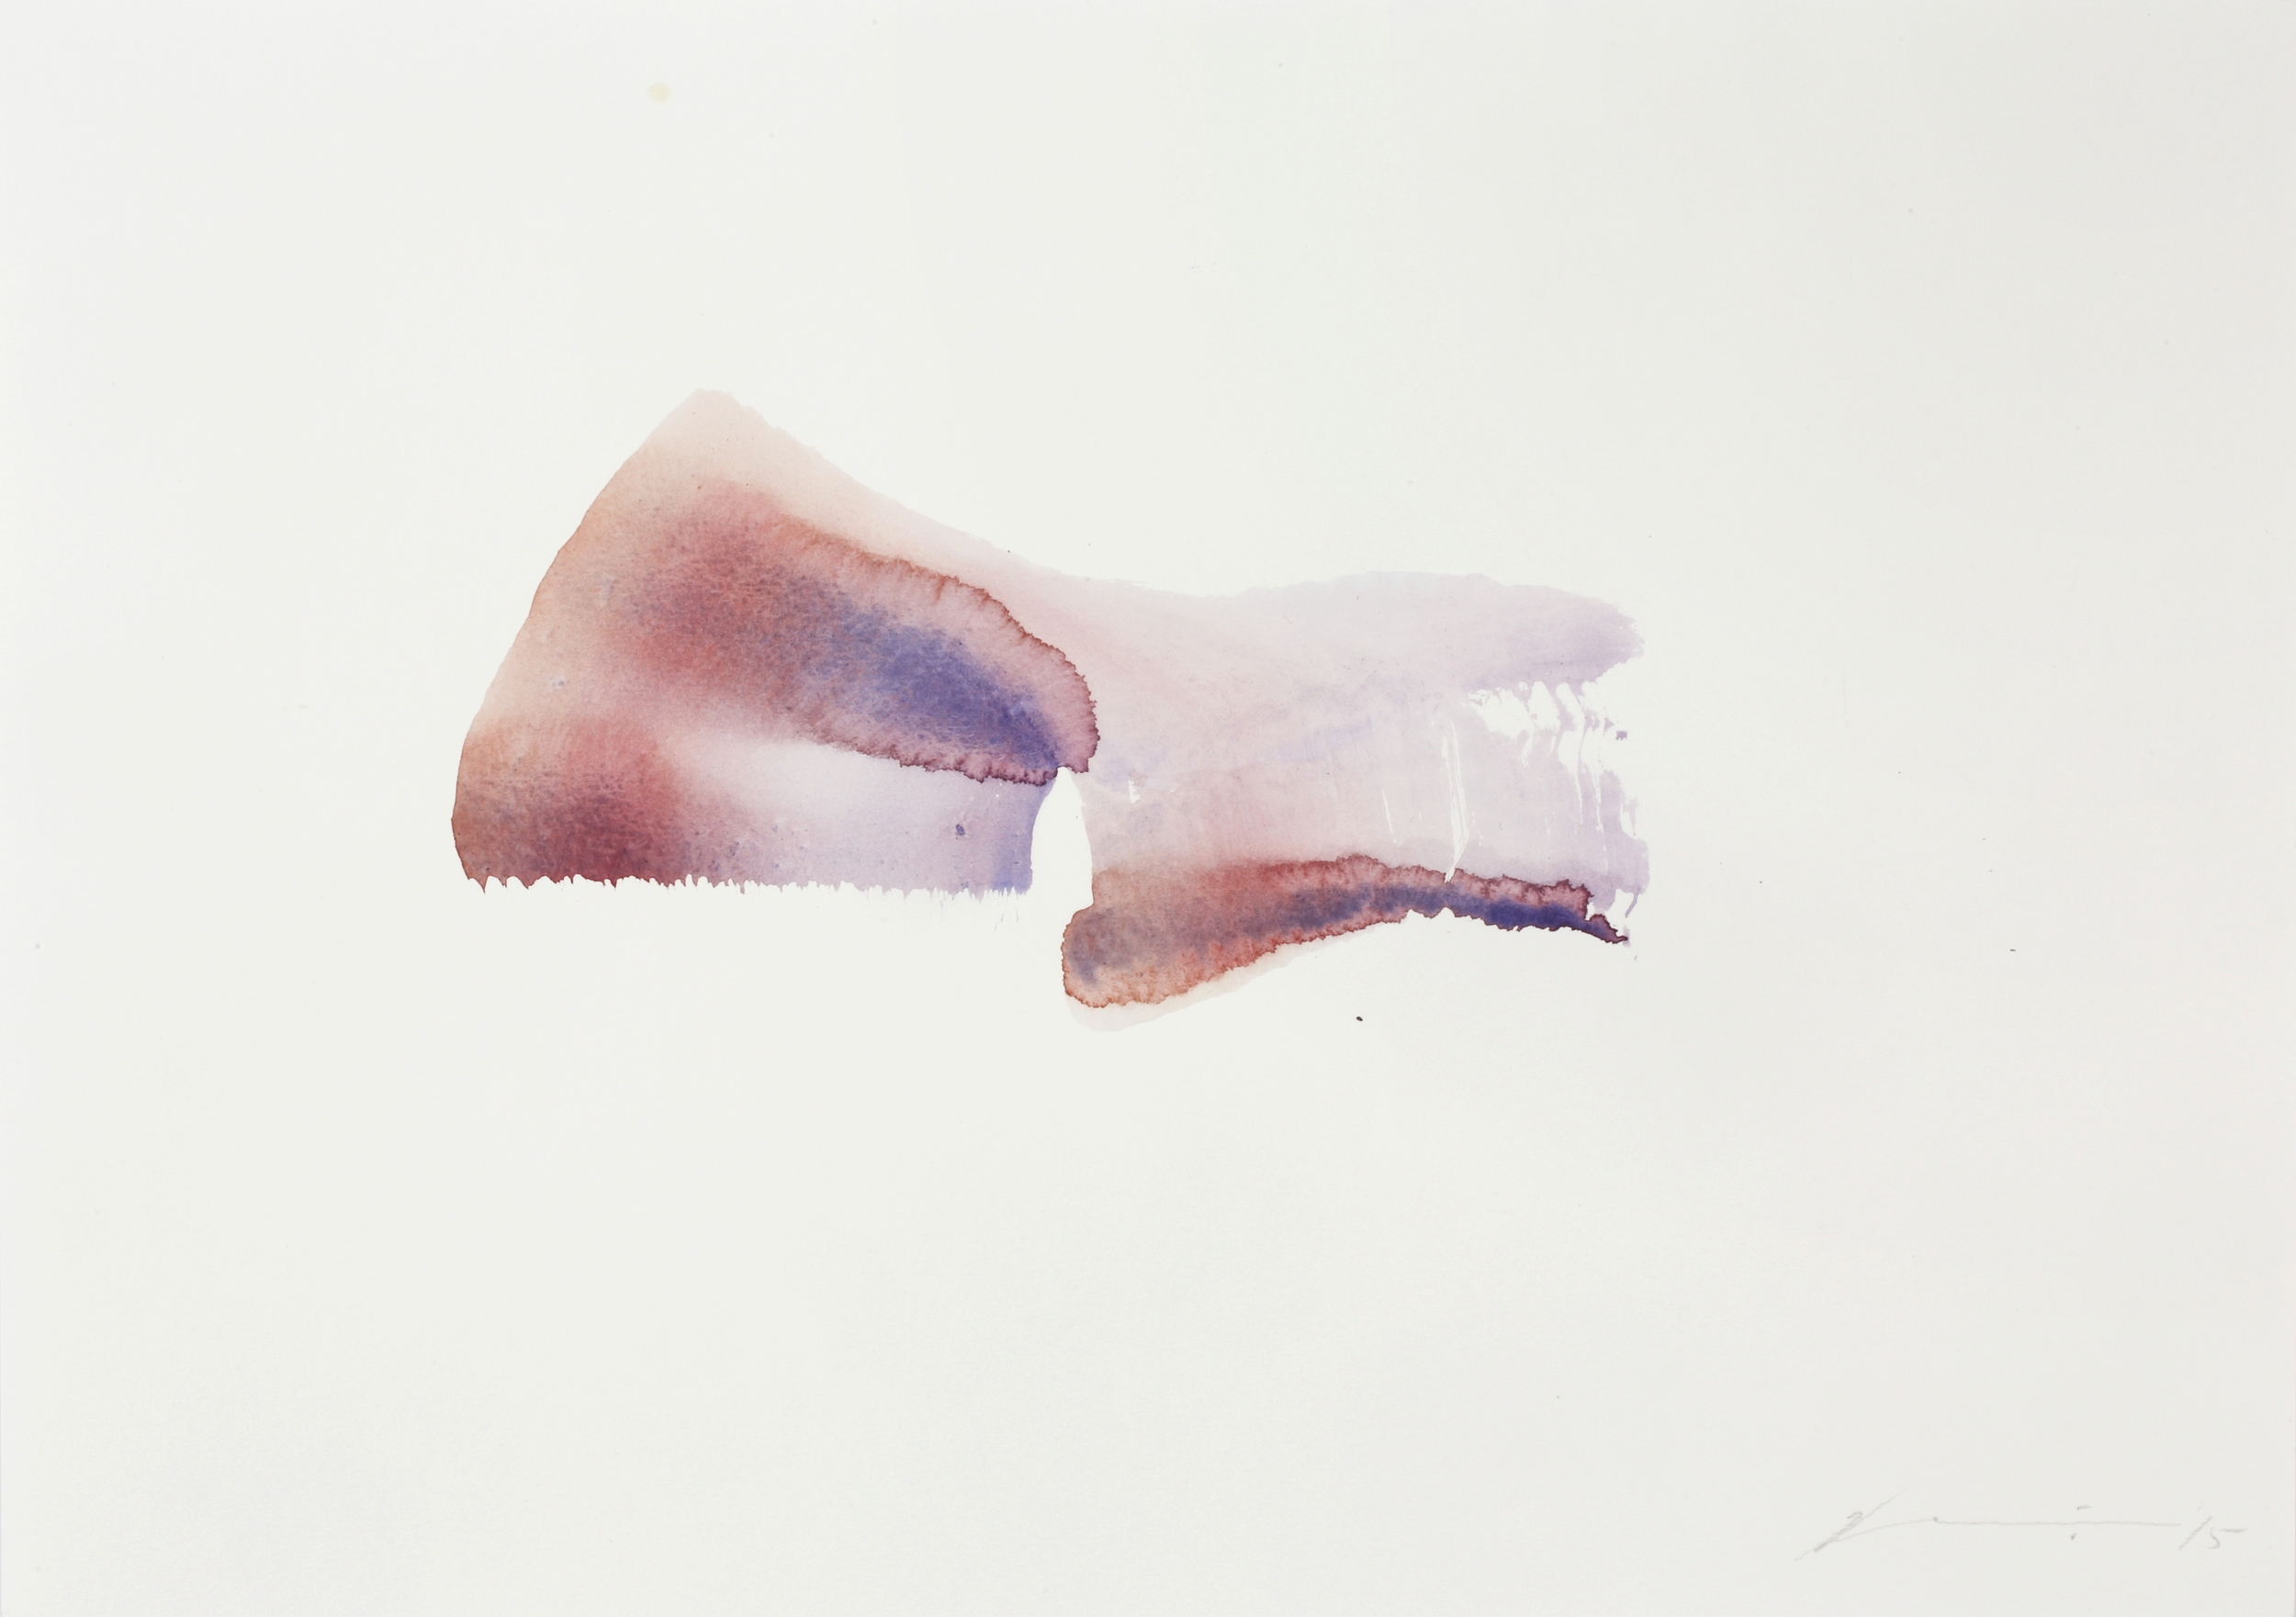  Untitled, watercolor on paper, 35x49cm, 2015 